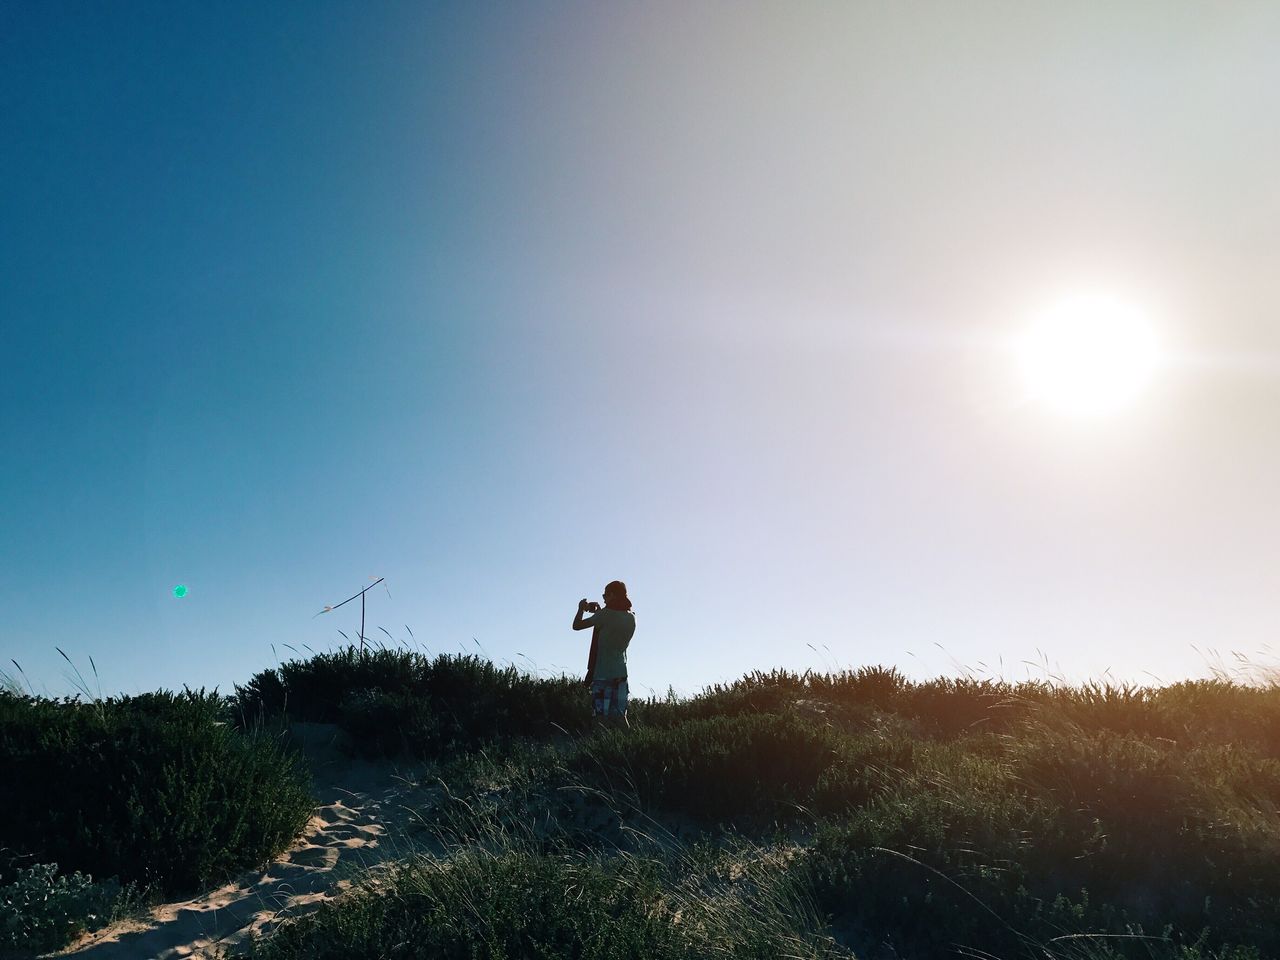 Man photographing while standing on field against sky during sunny day